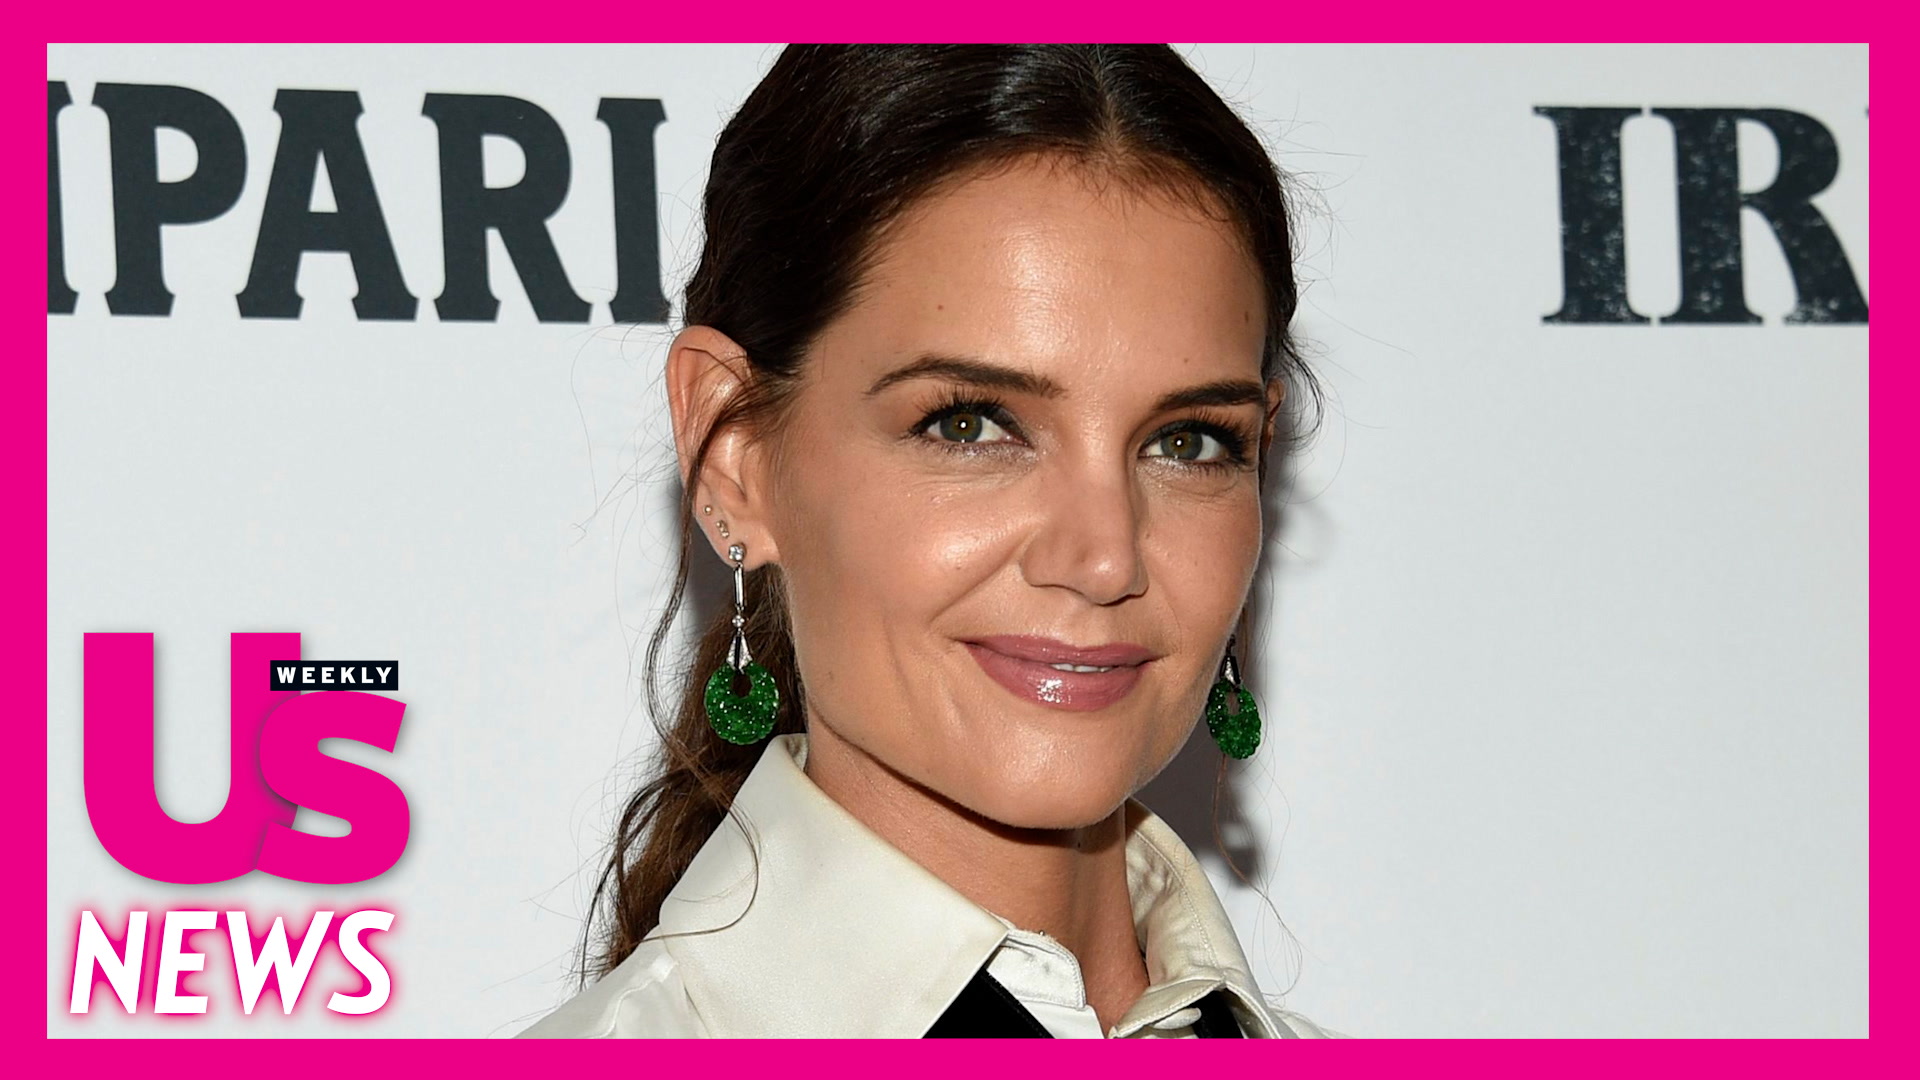 Who is katie holmes dating today in Orlando